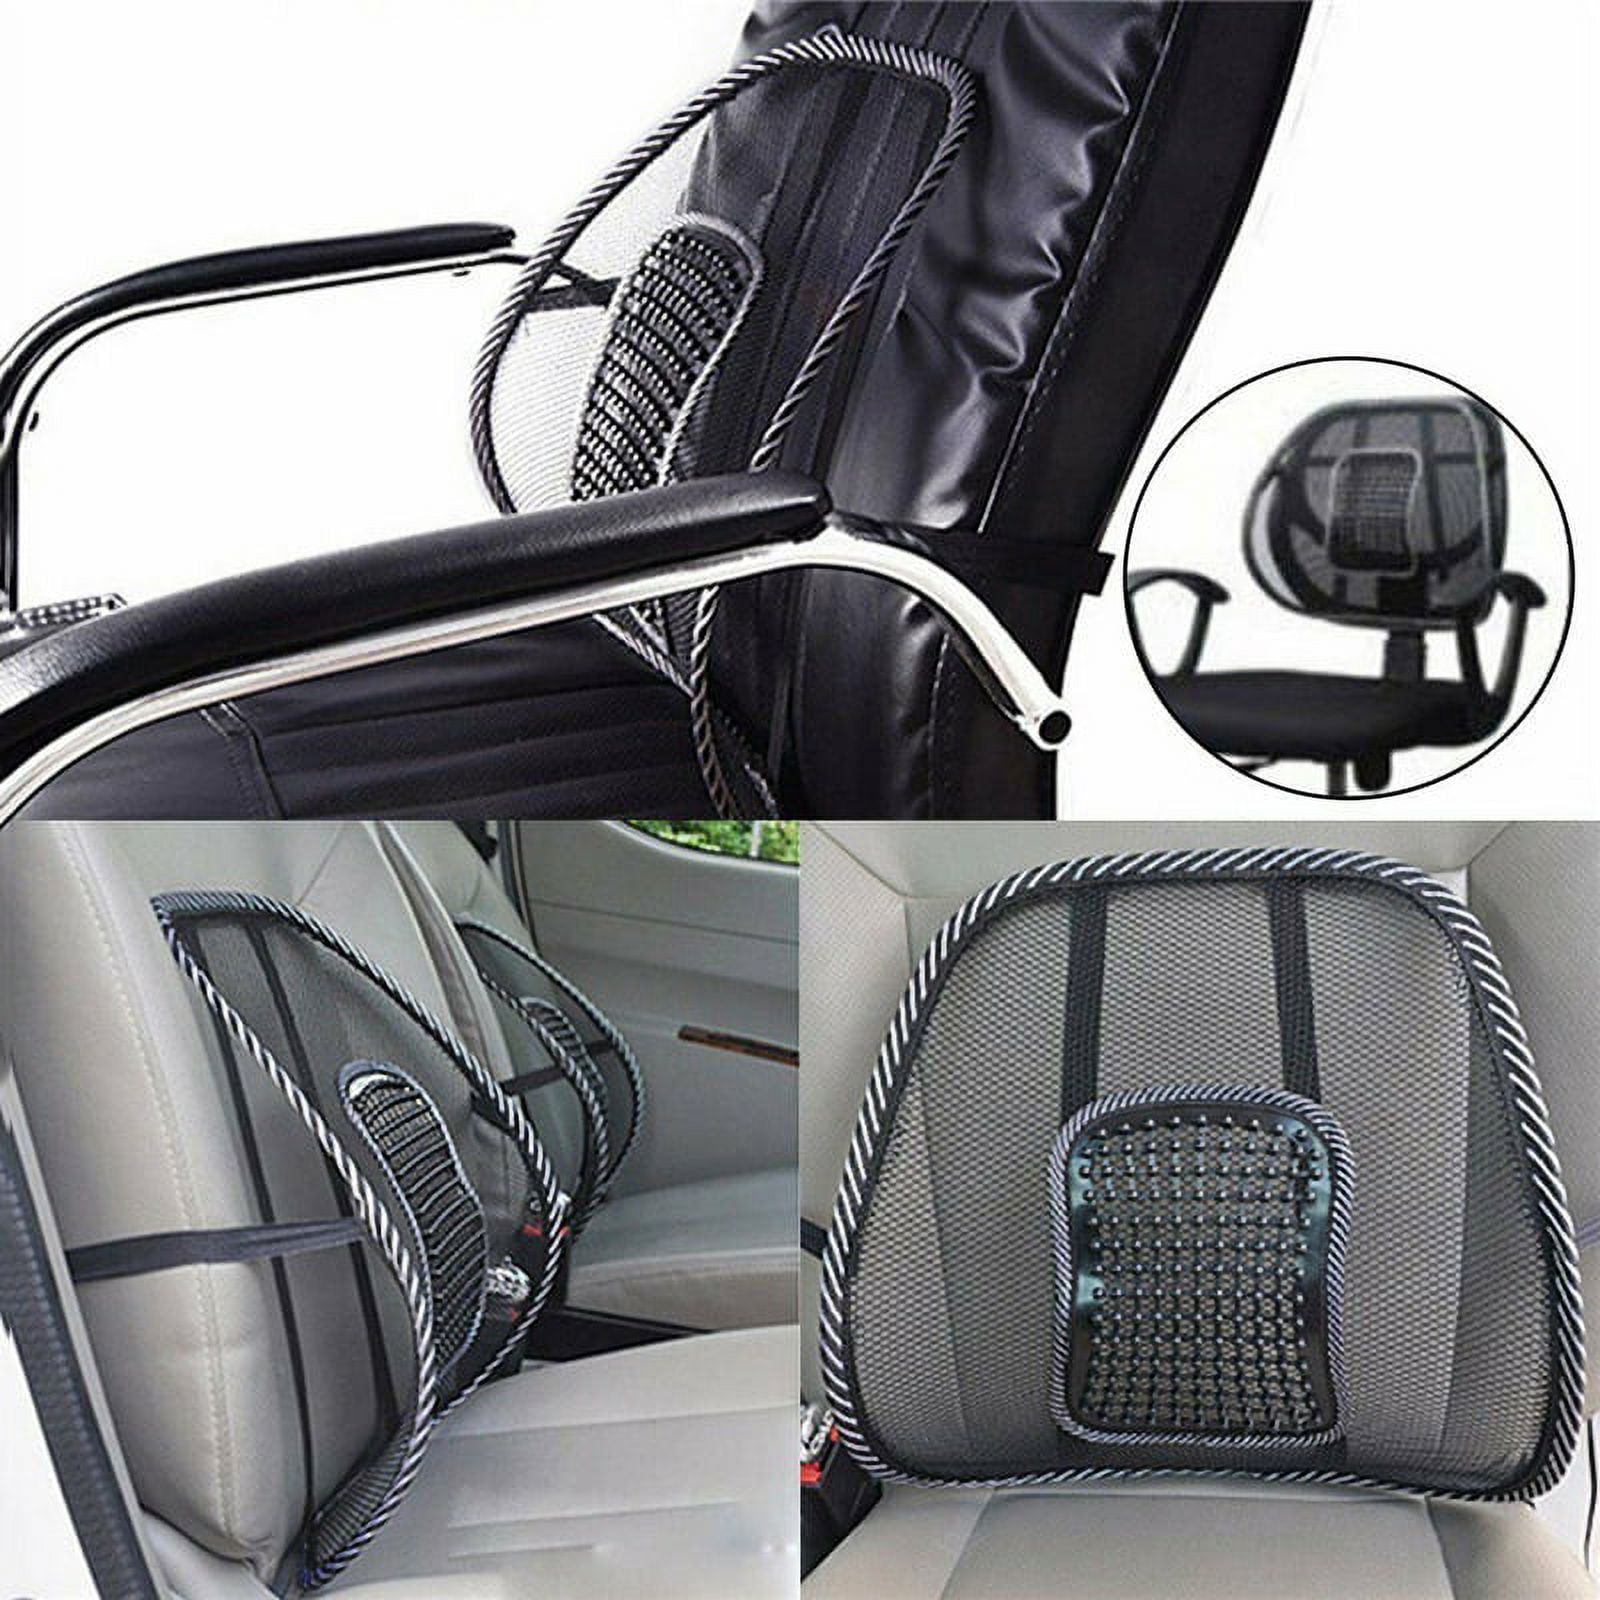 Back Support Cushion Car Office Chair Truck Seat Airplane Travel